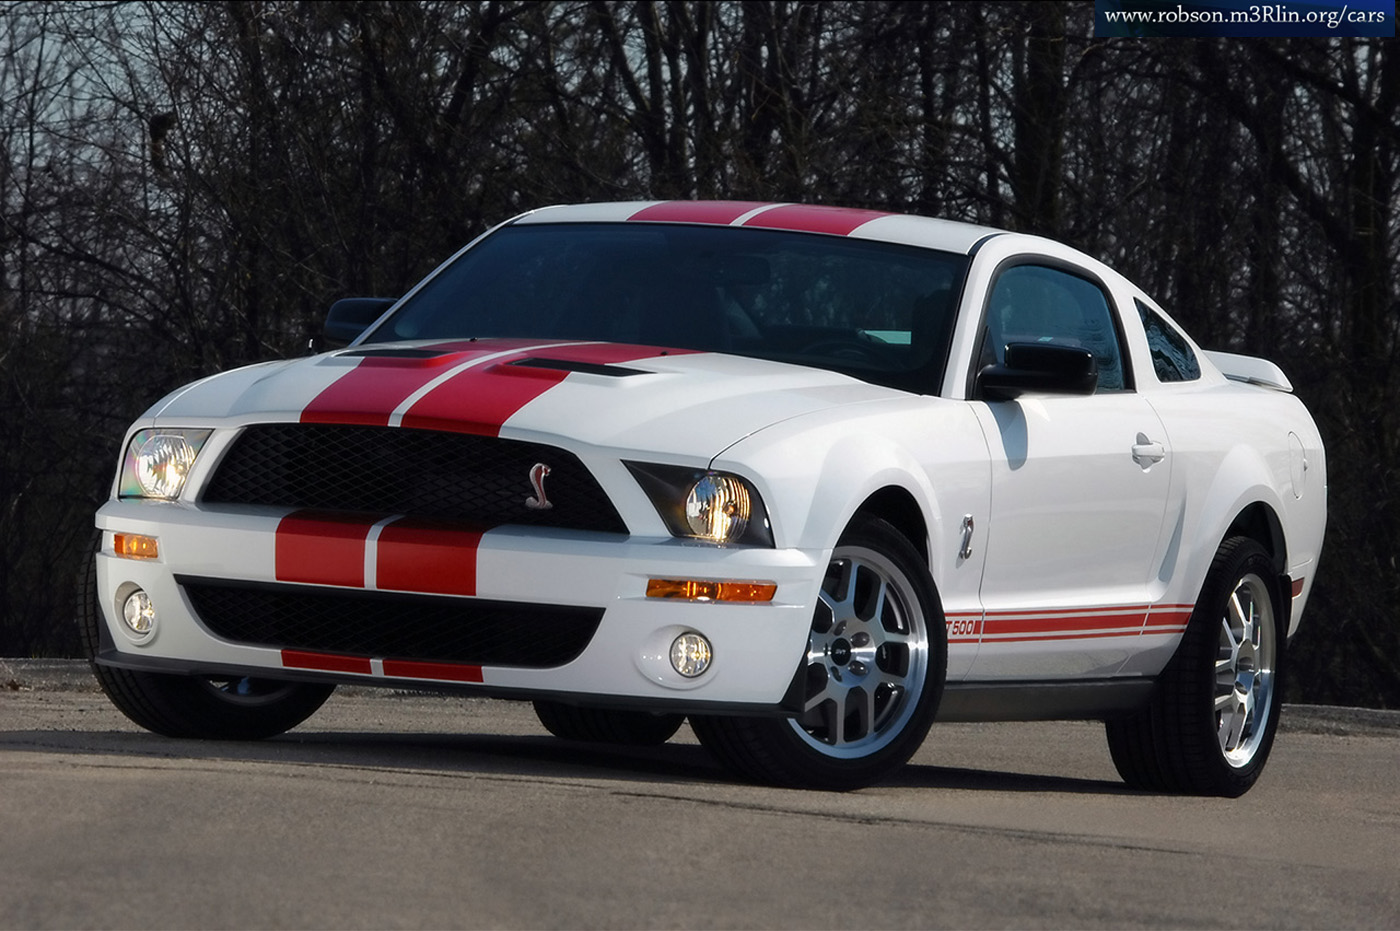 Ford Mustang Shelby Cobra GT 500 Backgrounds, Compatible - PC, Mobile, Gadgets| 1400x931 px